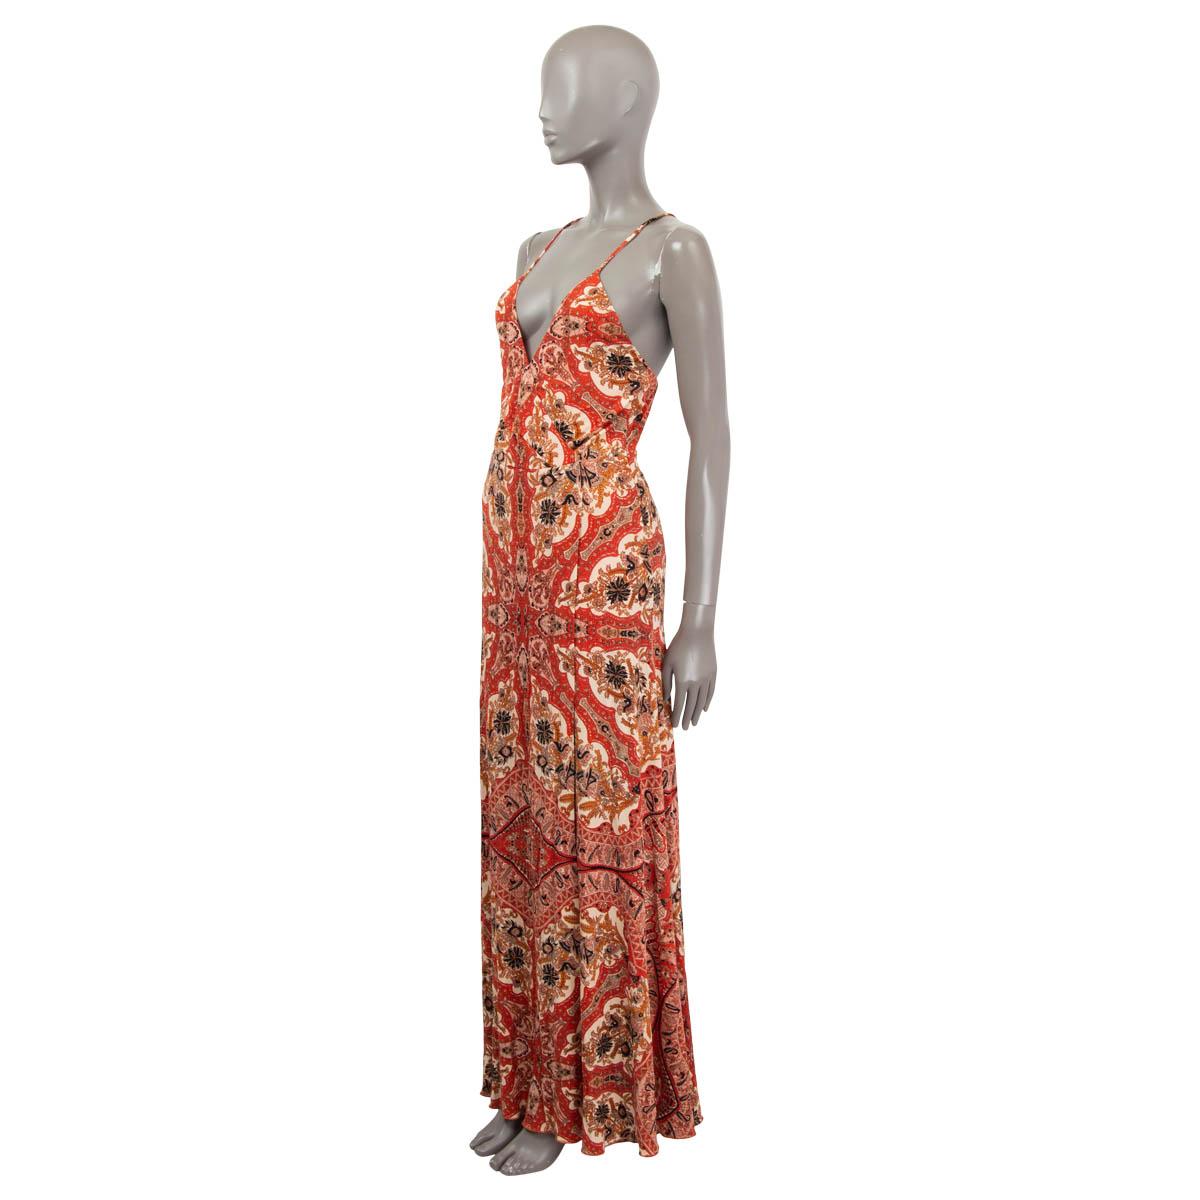 100% authentic Etro sleeveless paisley print maxi dress in rede, light salmon, black and brown viscose (100%) with spaghetti straps and criss-cross back. Opens with a zipper on the side and is lined in coral viscose (100%). Has been worn and is in